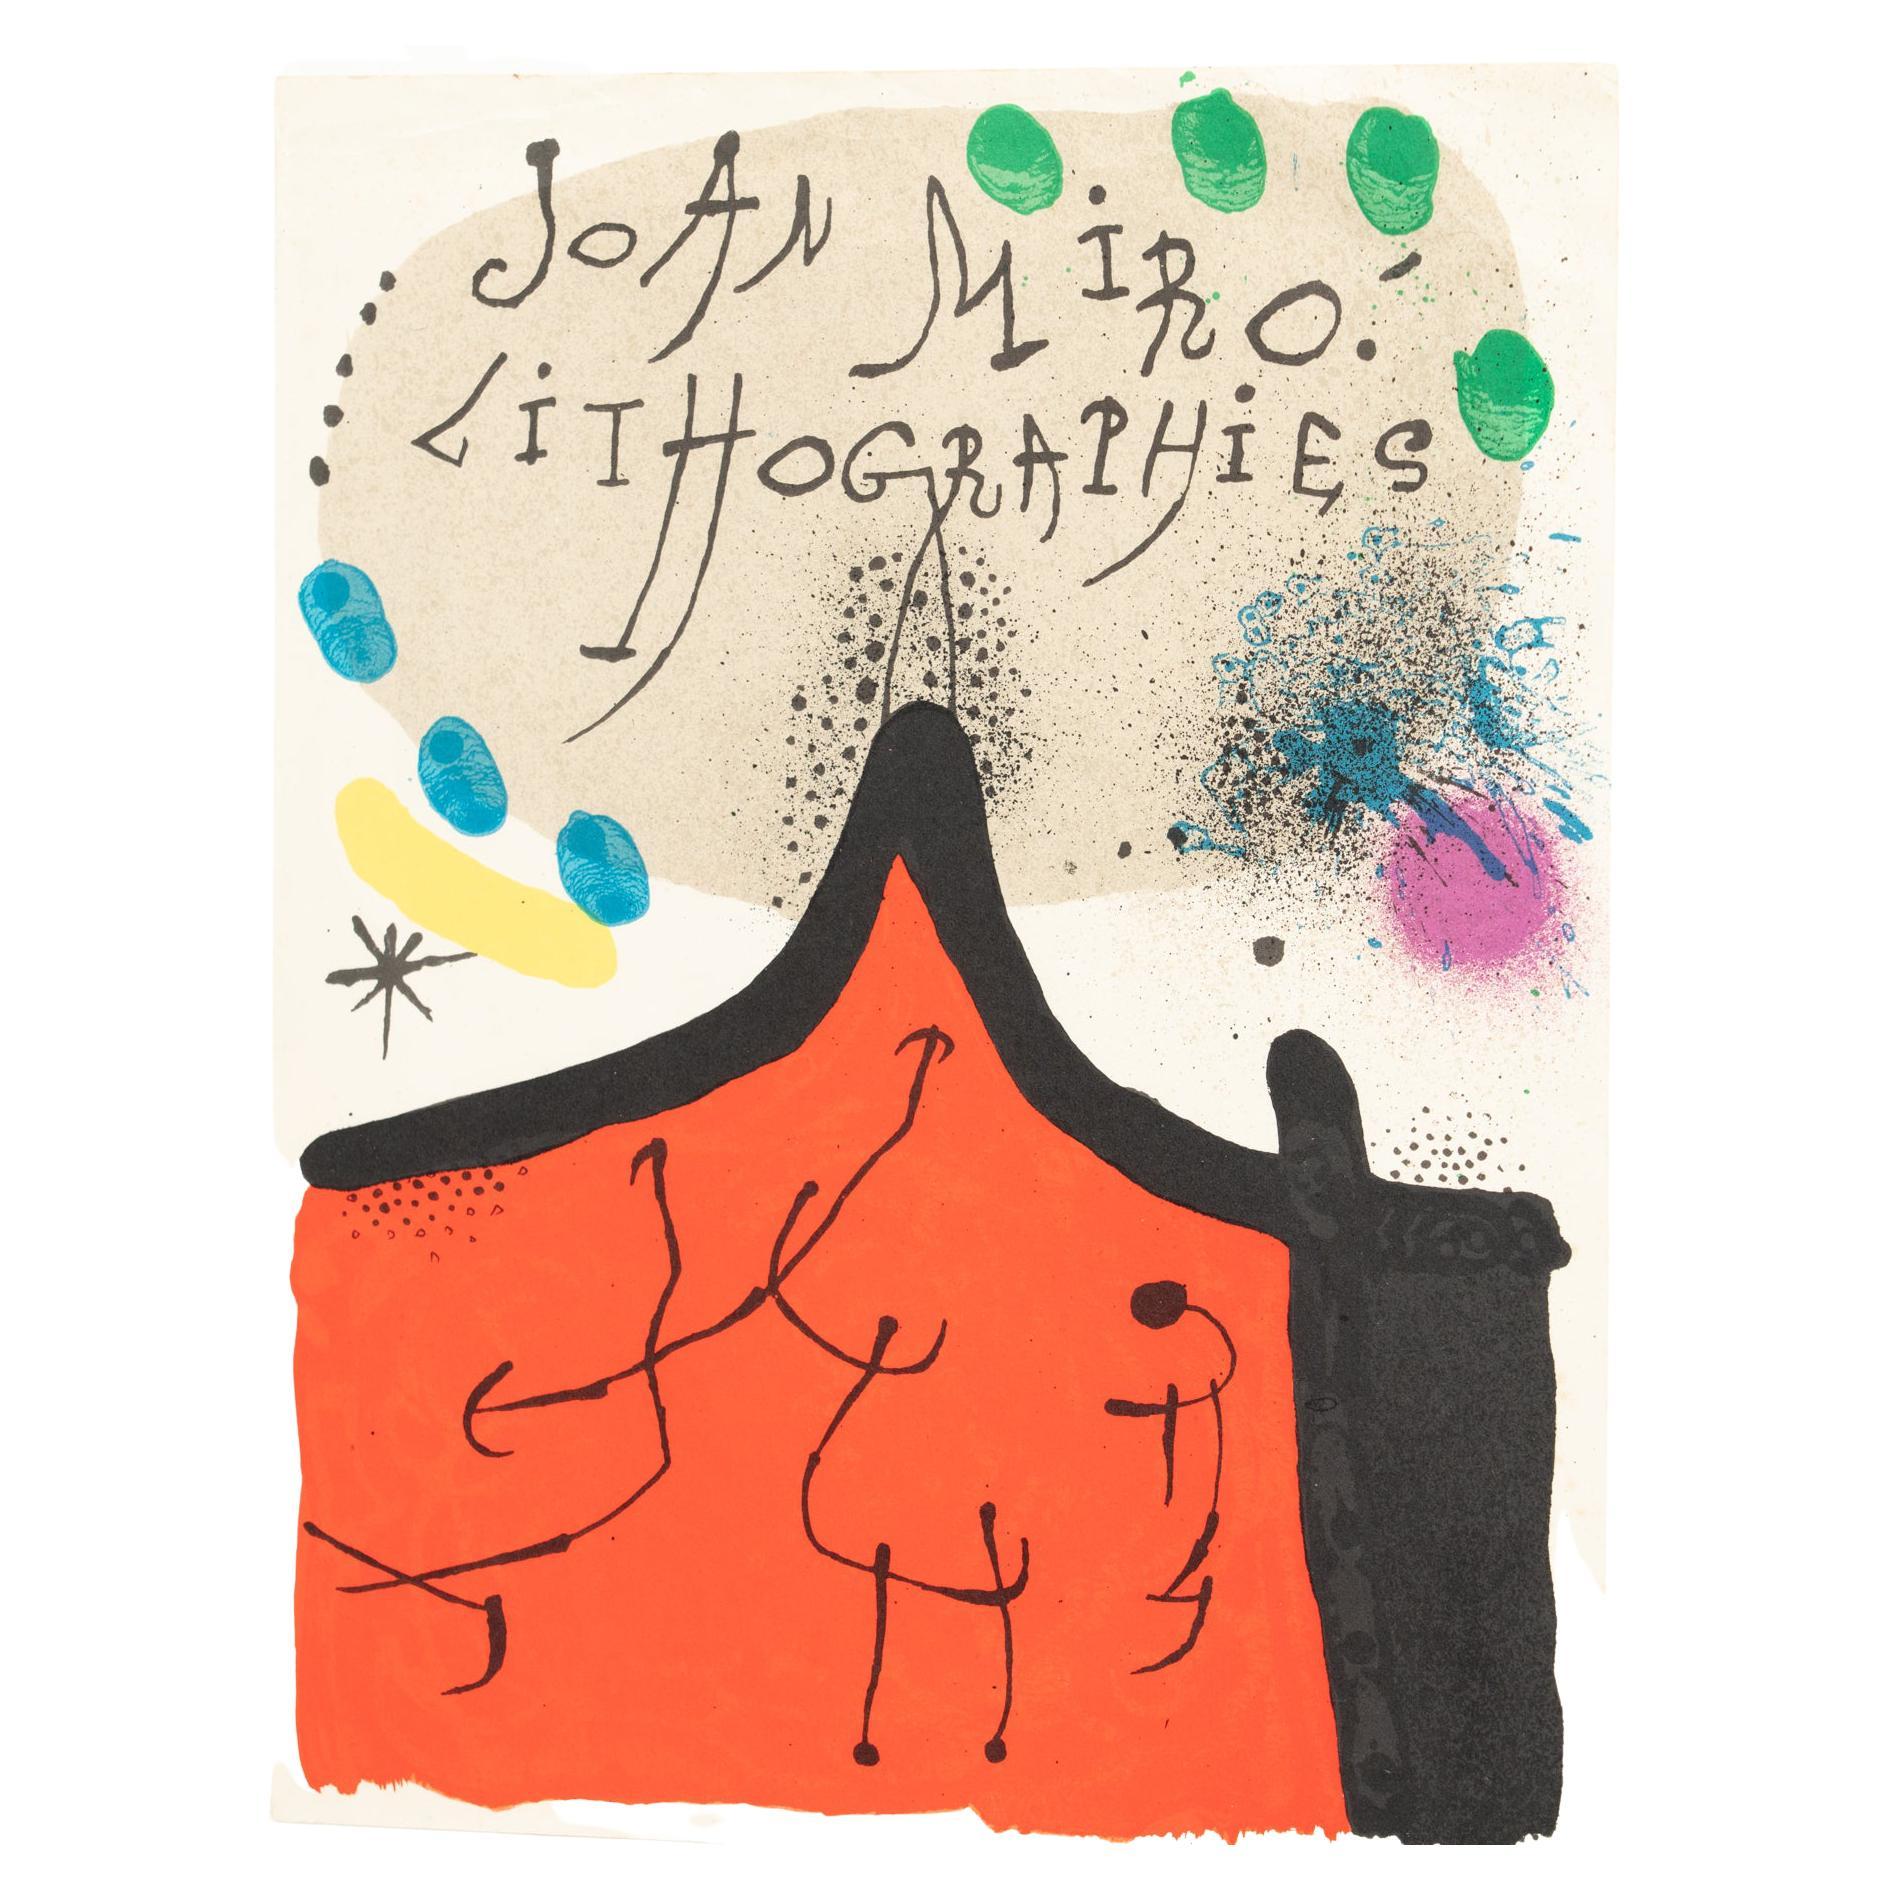 Joan Miró original cover lithograph from the publication 'Lithographs Vol.1'. 

Published by Tudor Publishing Company in 1972, New York.

Framed.

Signed by Joan Miró on the plate.

In good original condition, with minor wear consistent with